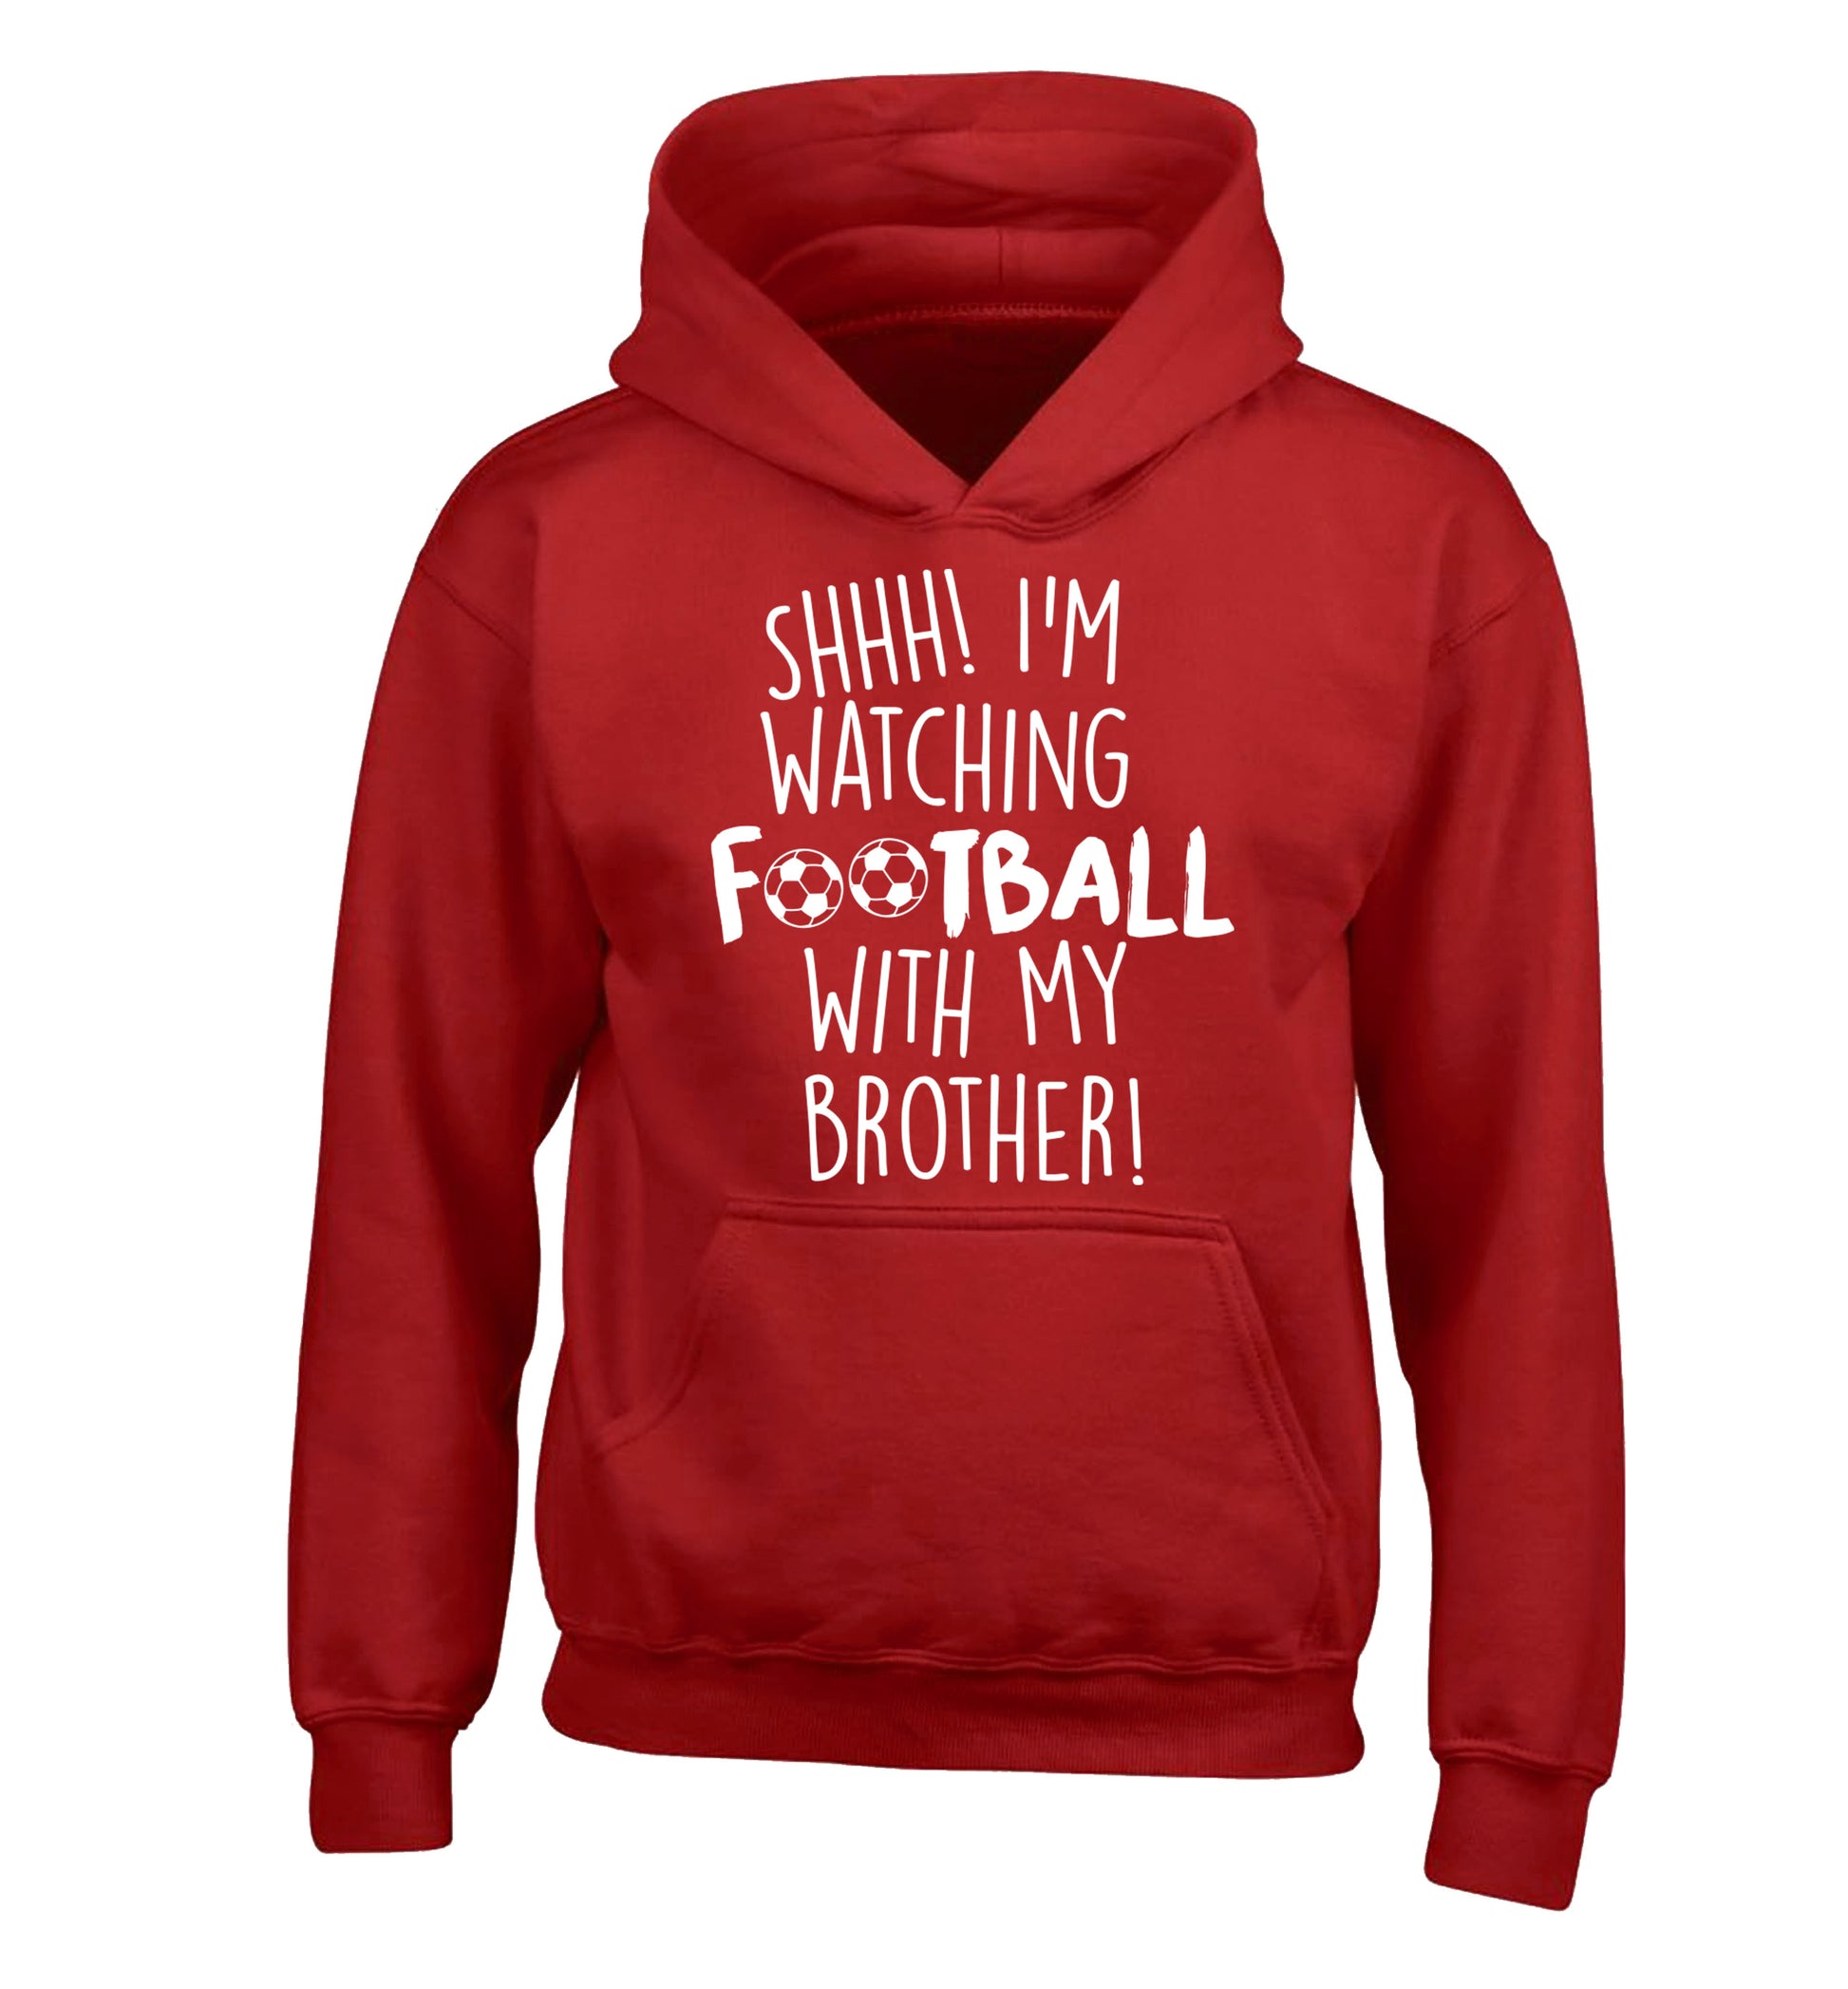 Shhh I'm watching football with my brother children's red hoodie 12-14 Years